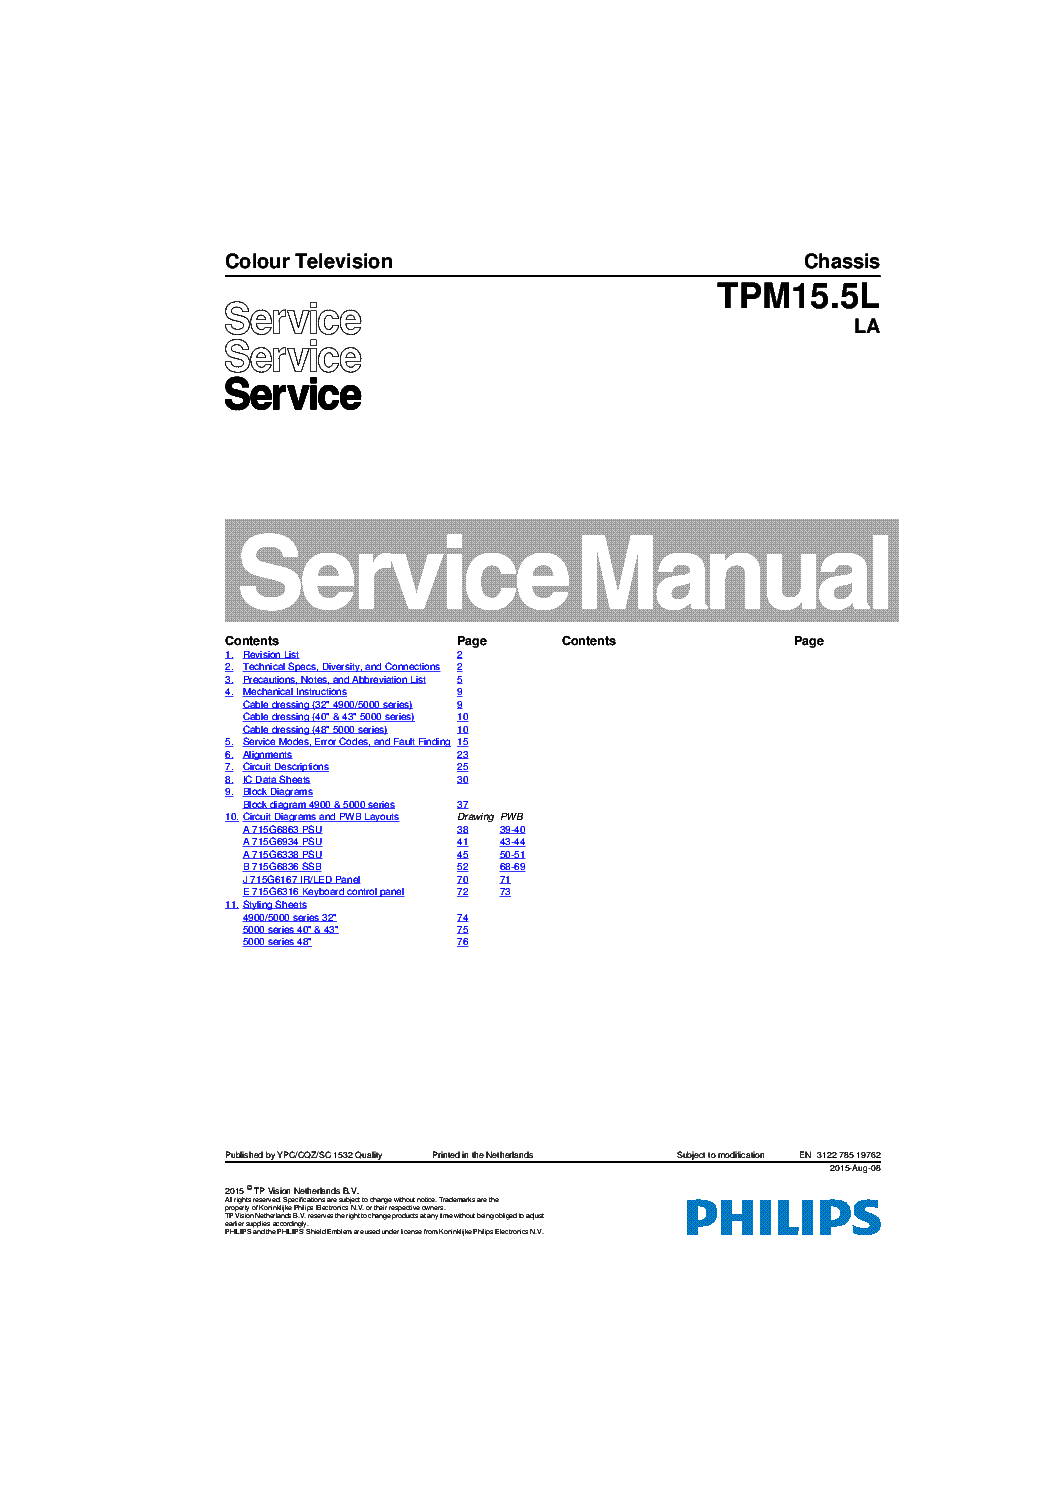 PHILIPS TPM15.5LLA 312278519762 150808 service manual (1st page)